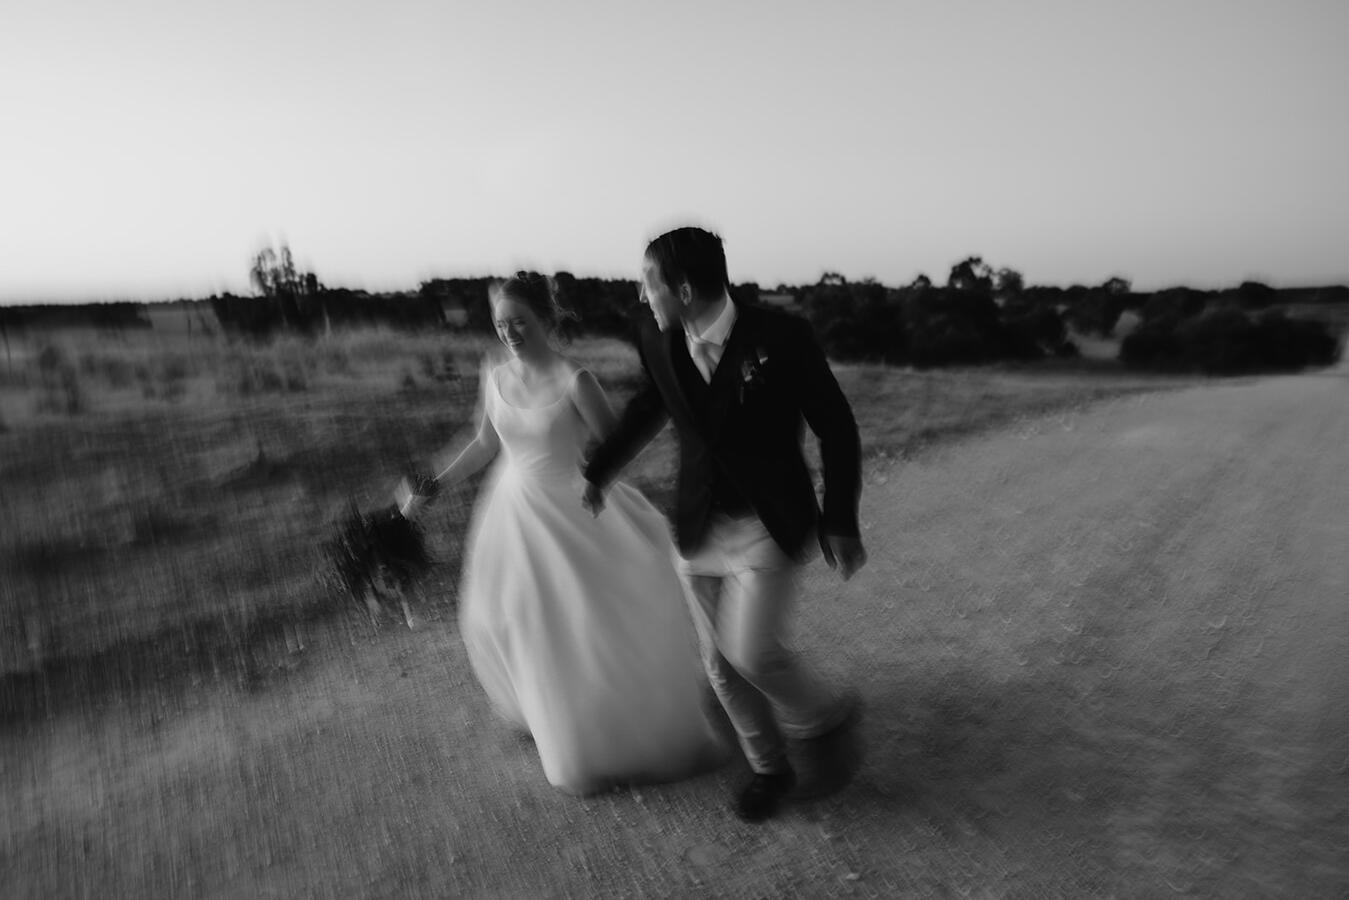 A bride and groom running down a dirt road enjoying themselves.